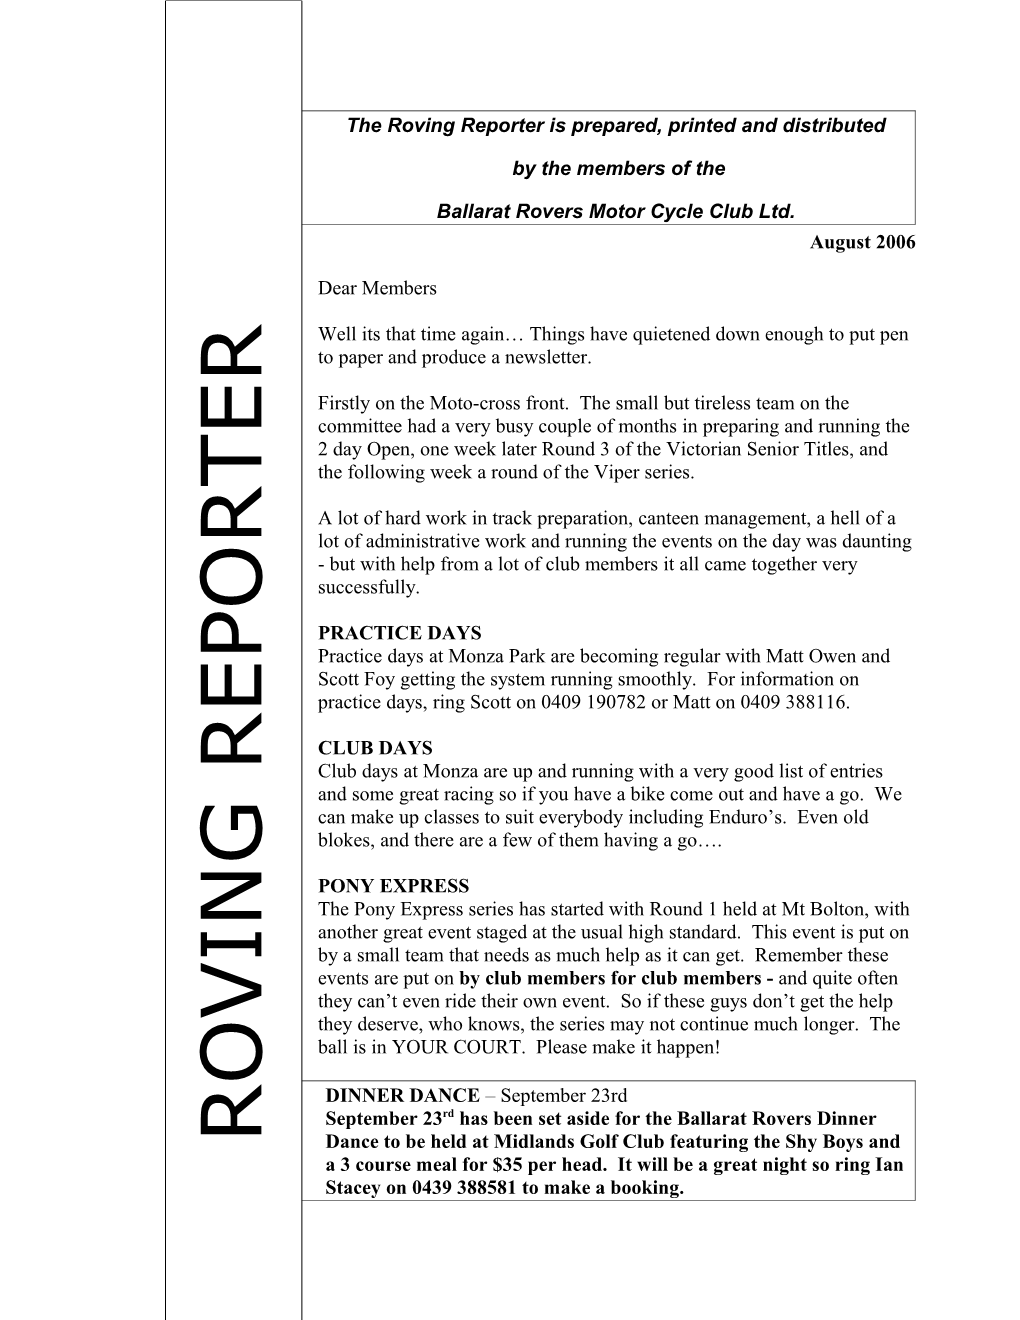 The Roving Reporter Is Prepared, Printed and Distributed